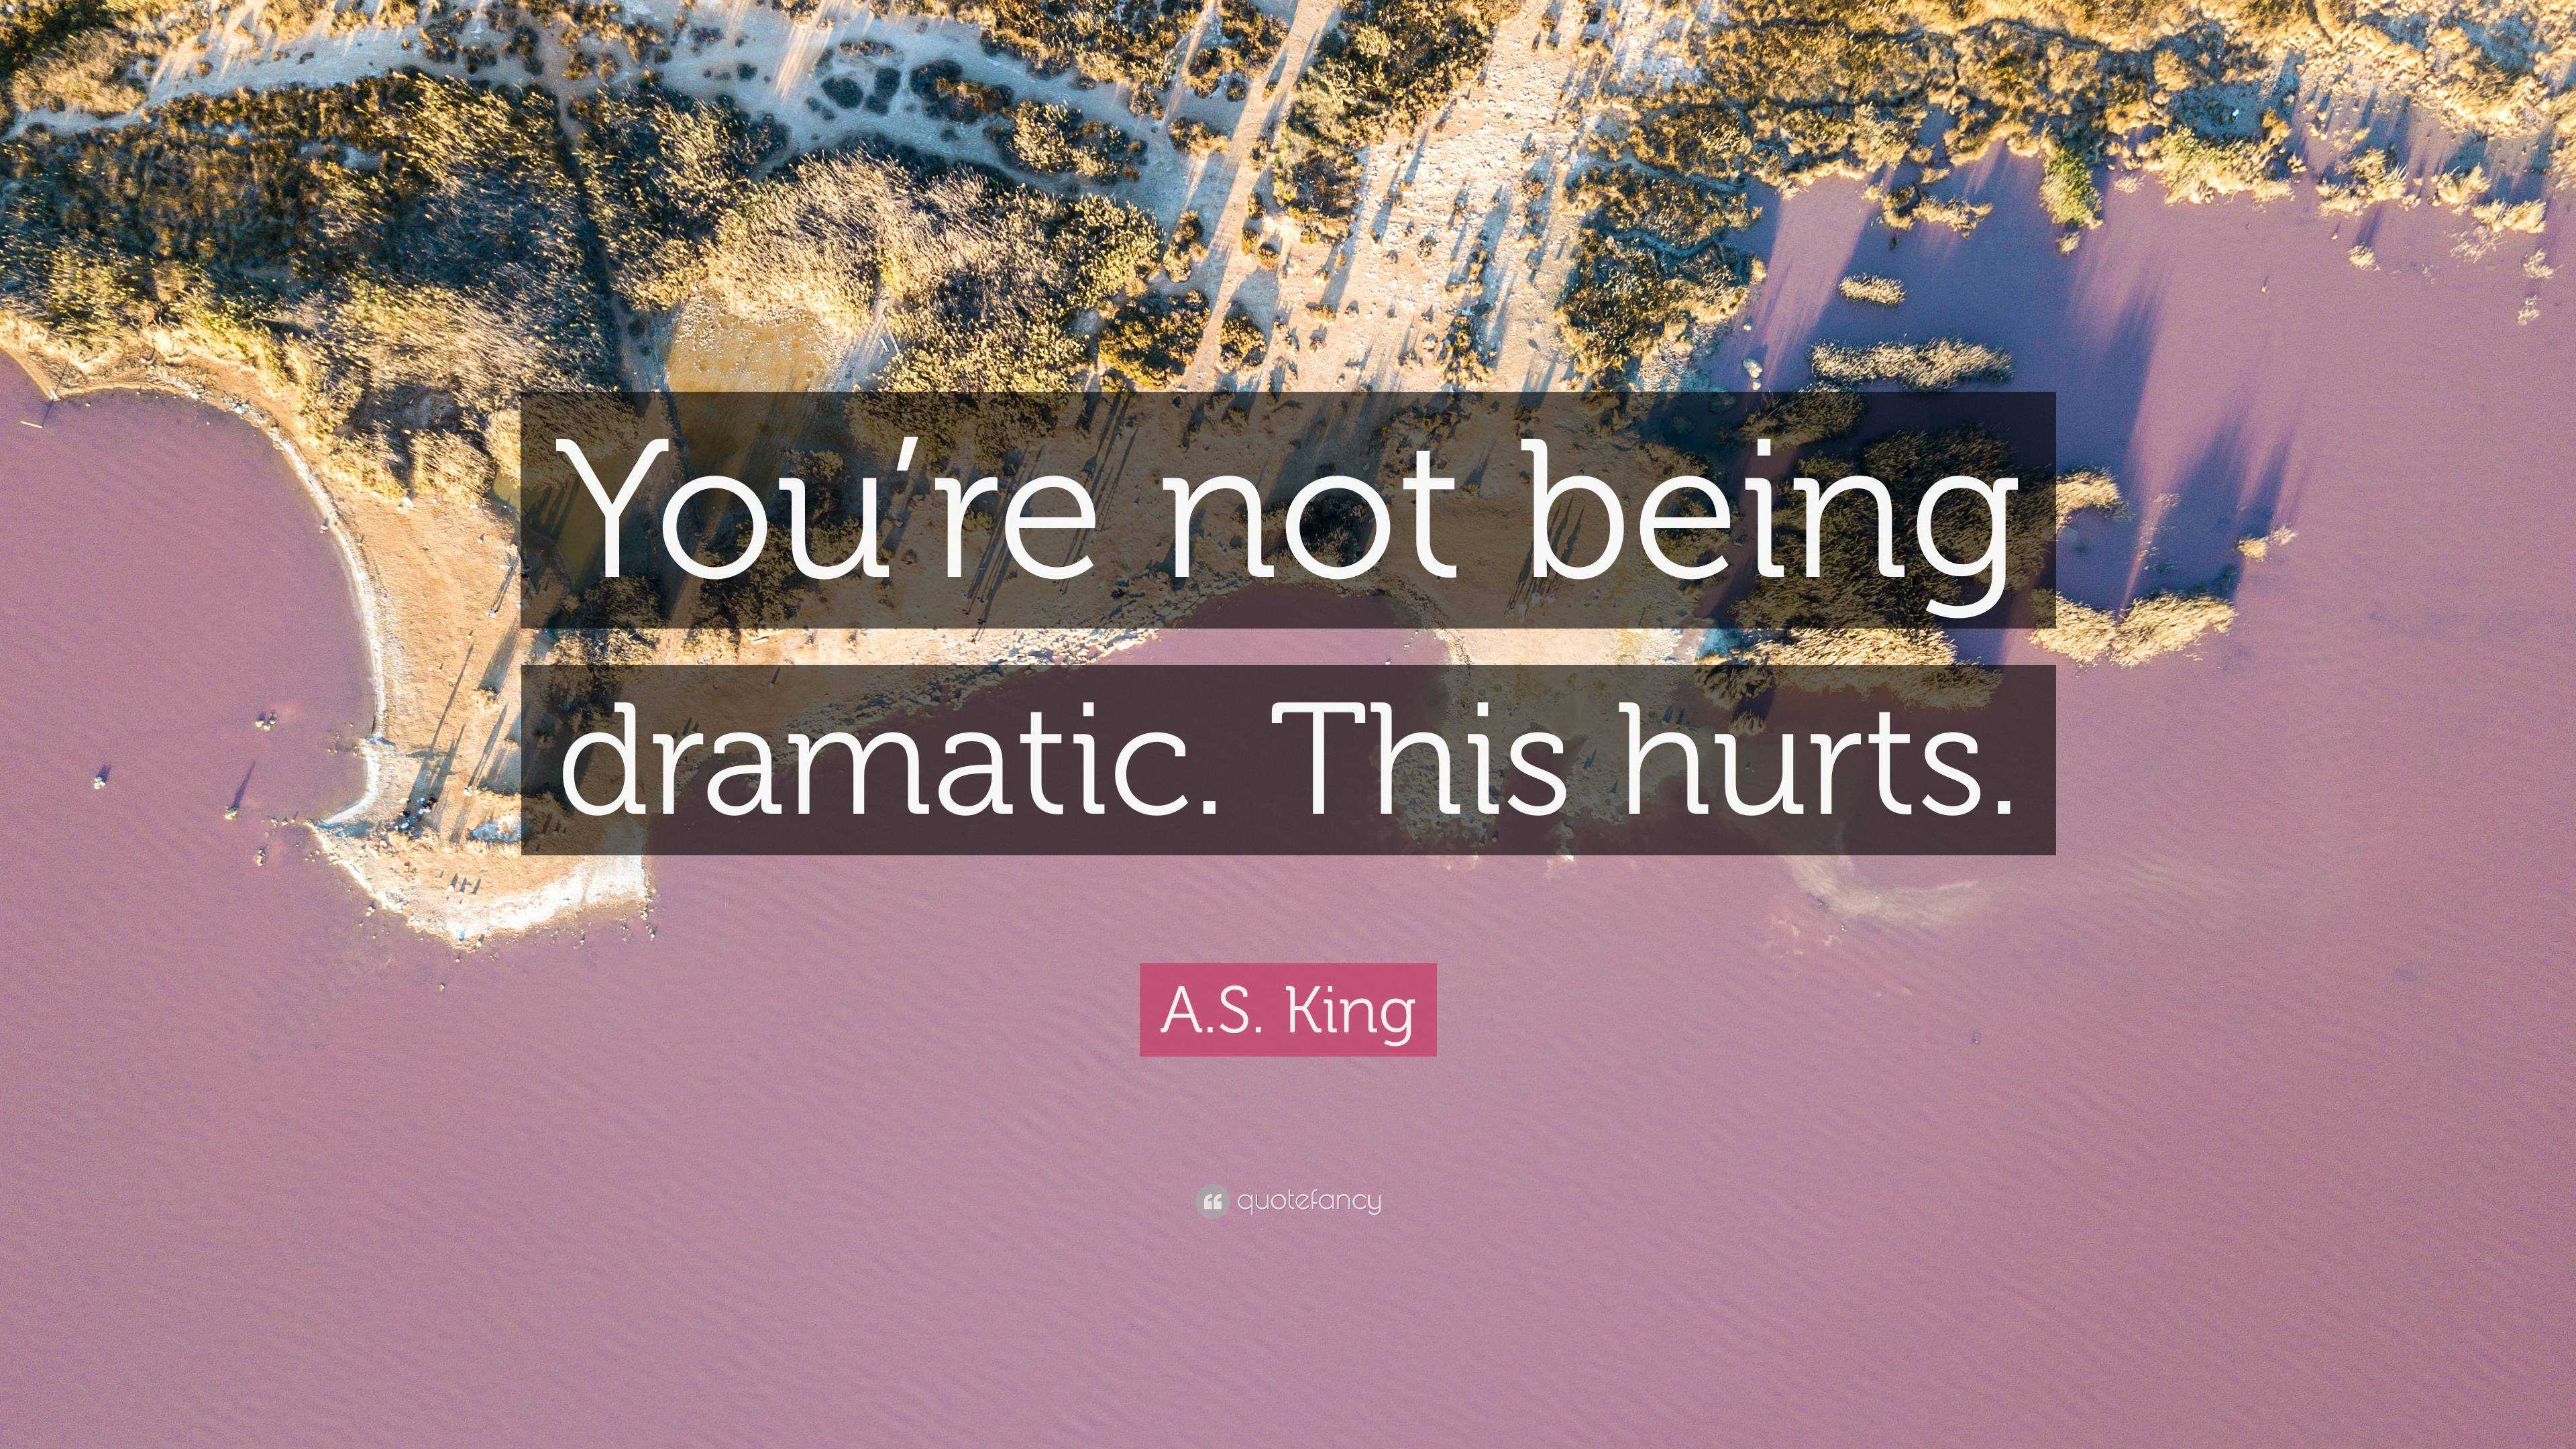 . King Quote: “You're not being dramatic. This hurts.”